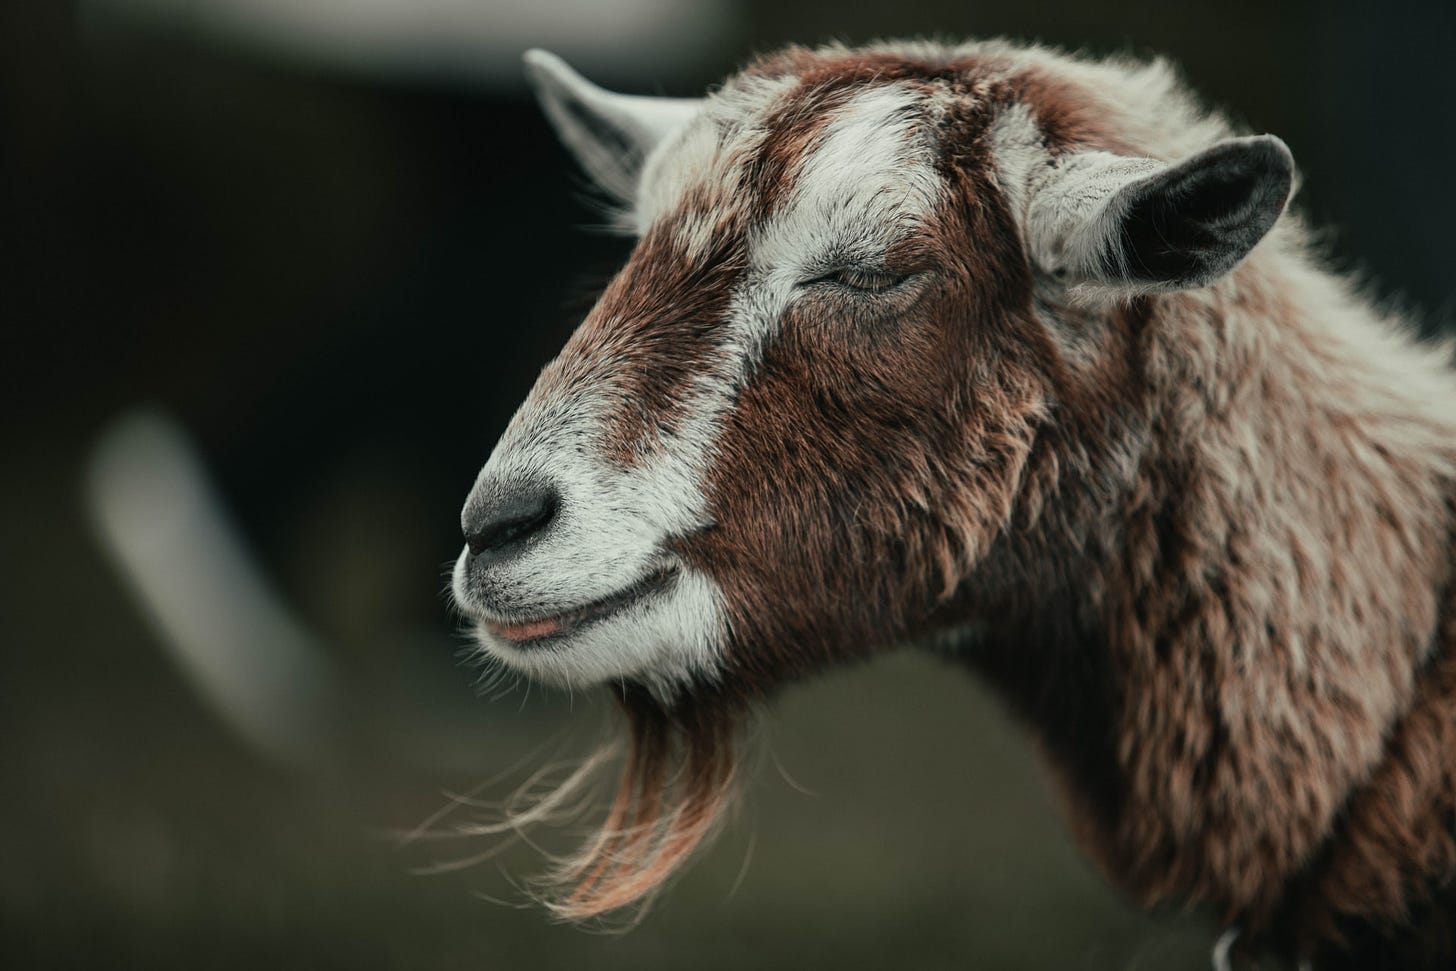 A profile of a goat head and neck. The goat is brown with a white stripe of fur from the eye to the snout. A wisp of brown scruff is below the chin, and his eyes are closed, and tongue out in a humorous manner.